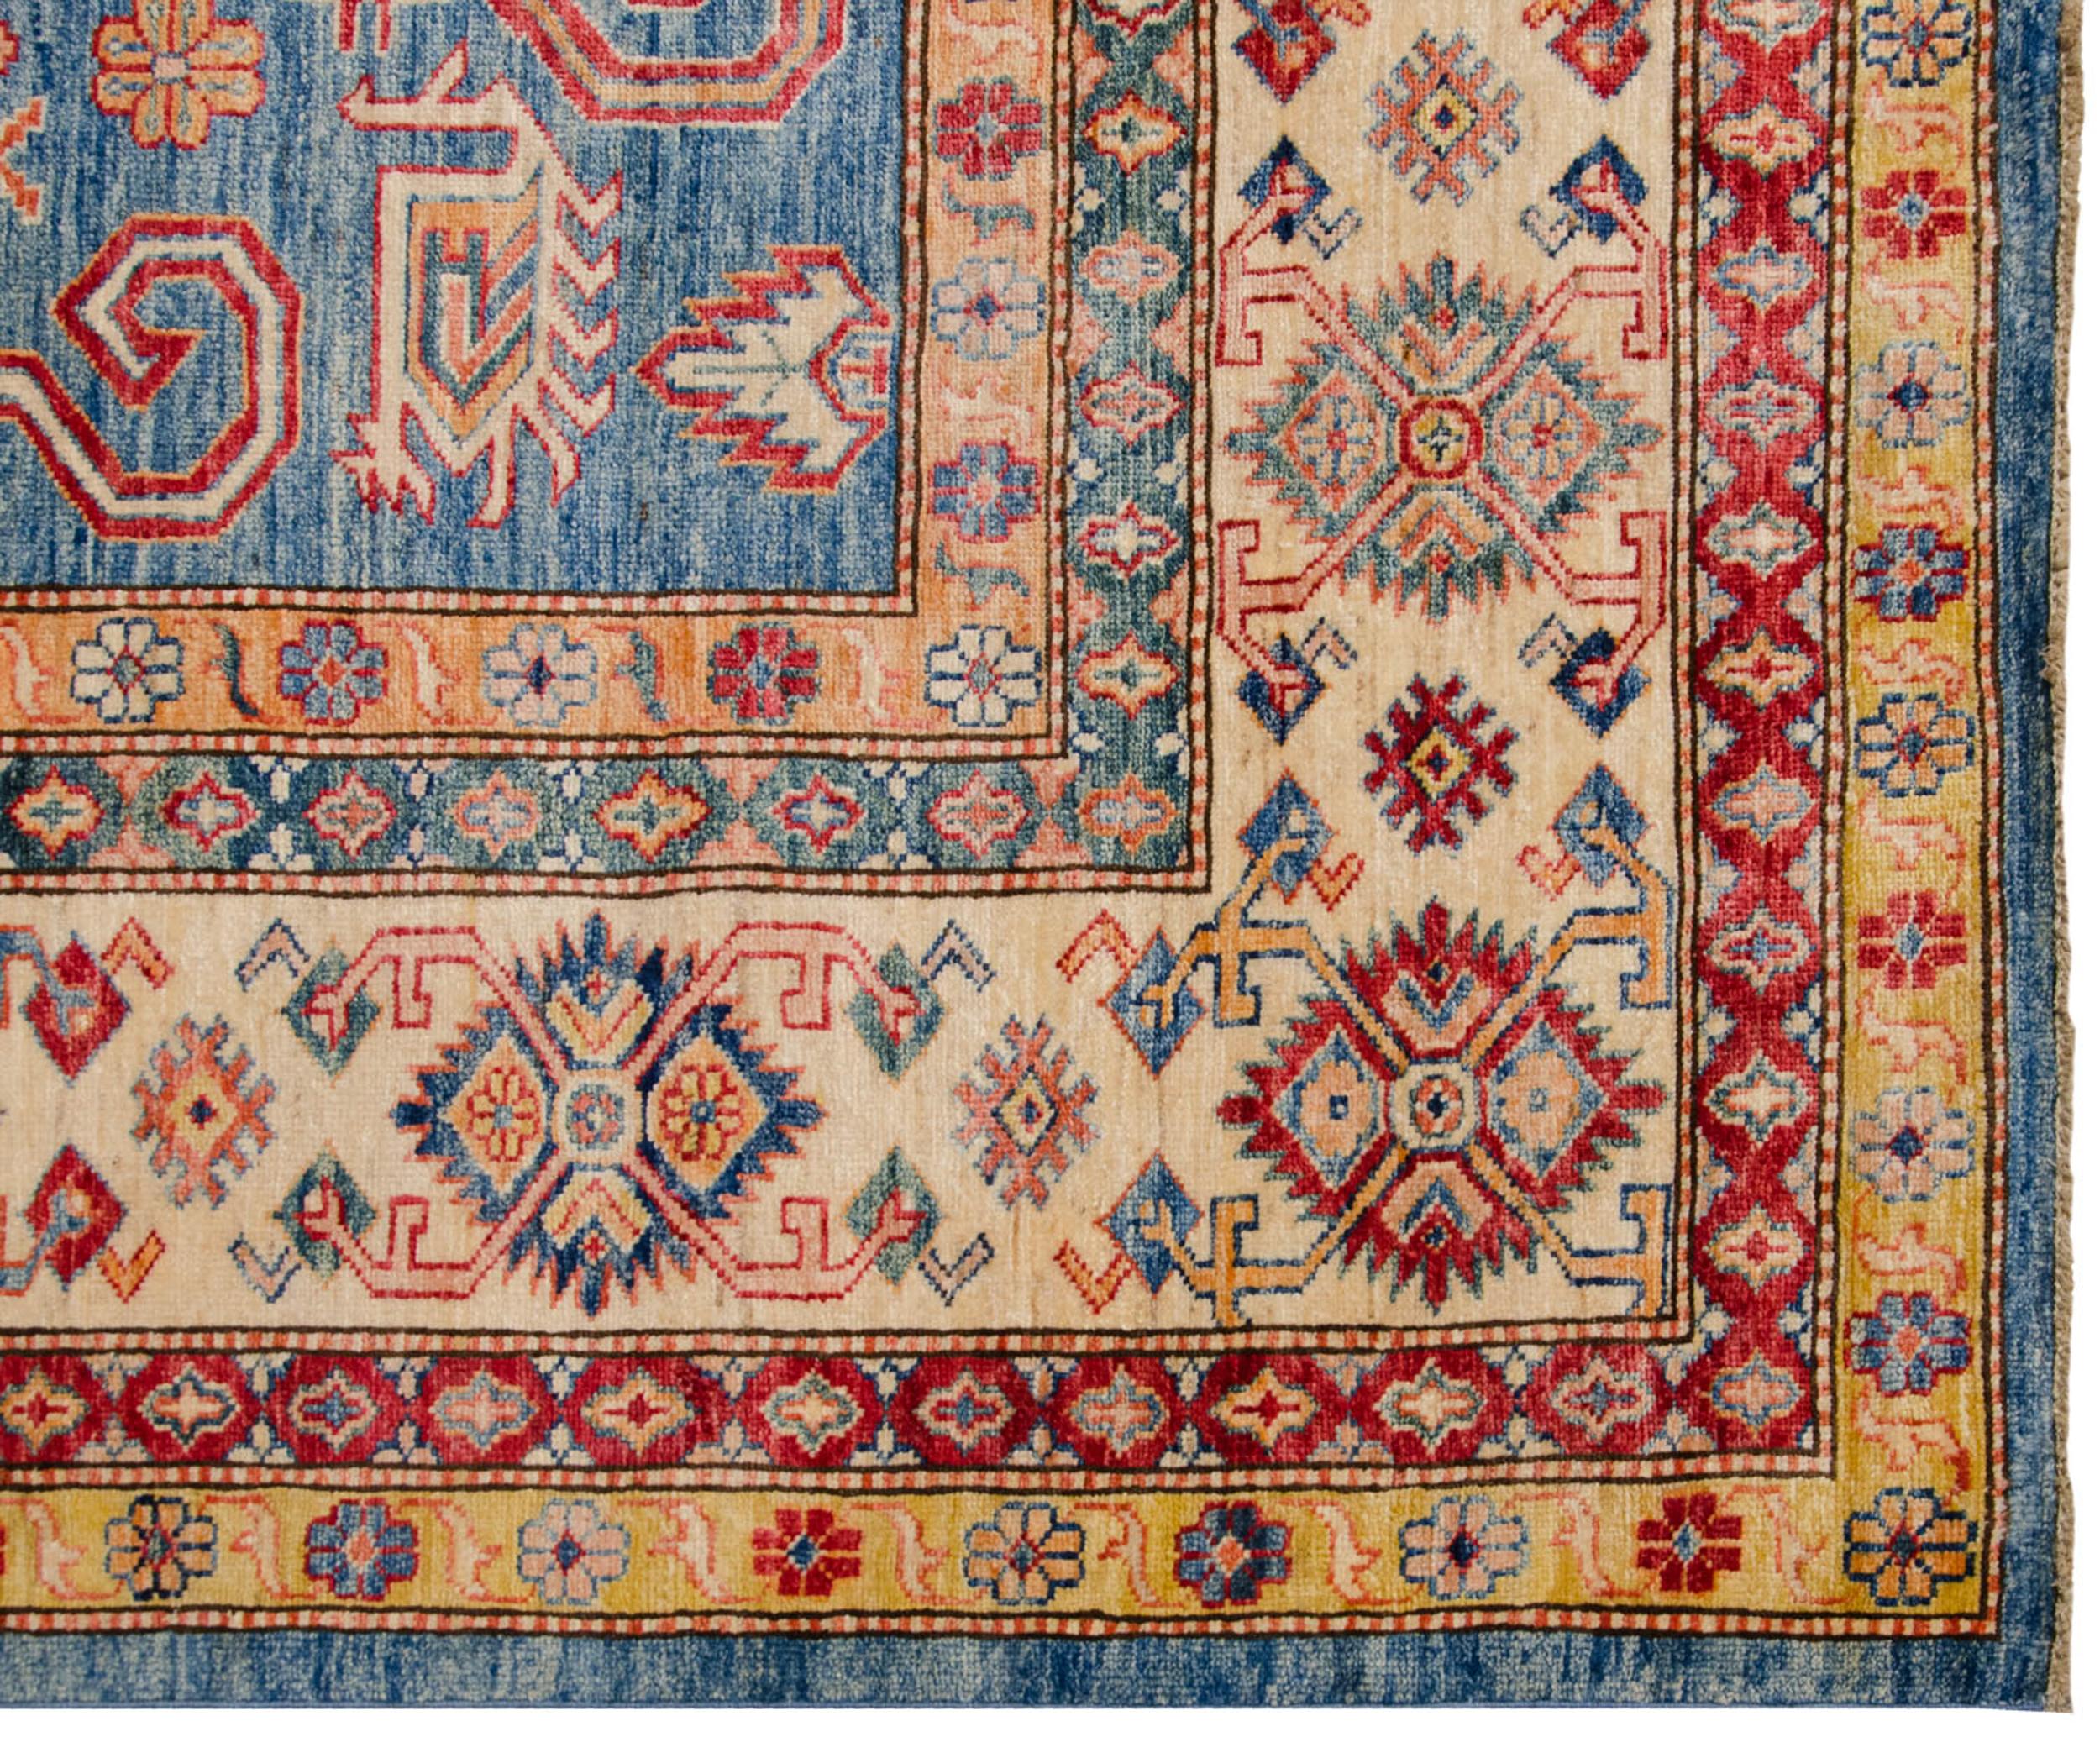 :: Covered field in a rams horn classic Caucasian Perpedil design motif atop a covered field of floral top views and germinating plants. Colors and shades include: Sky blue, ivory, cherry red, dusty saffron yellow, ivory and more. Condition notes: